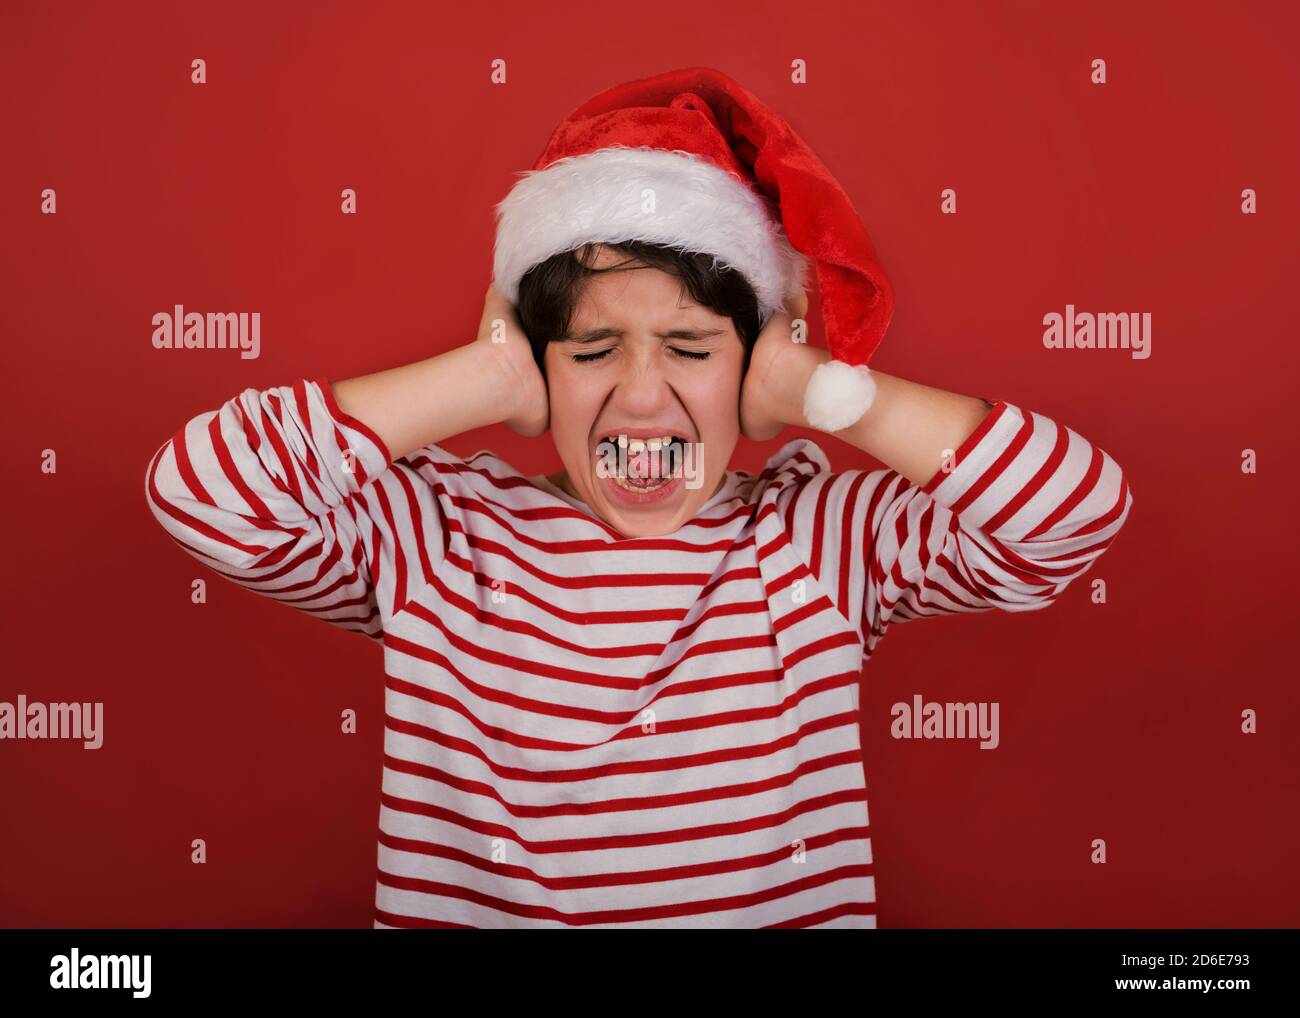 angry kid wearing Santa Claus hat with his hands on his head over red background Stock Photo